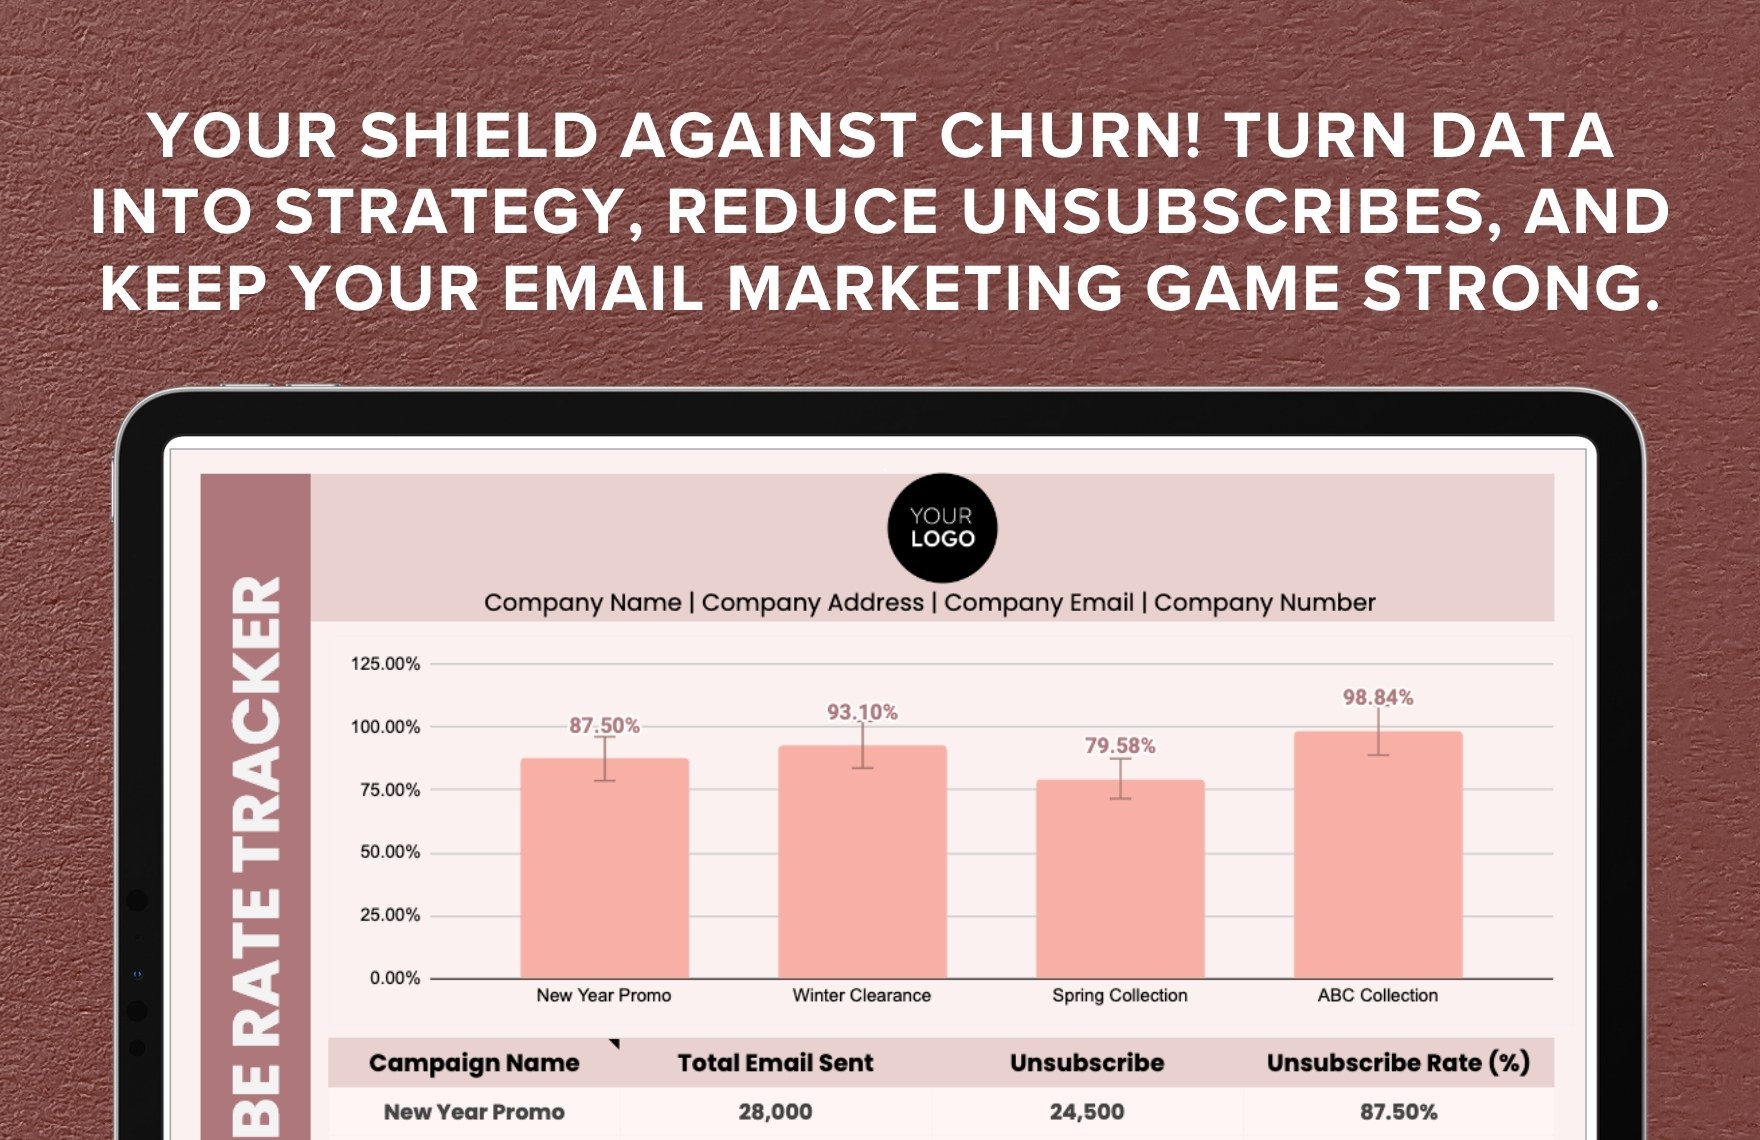 Email Marketing Unsubscribe Rate Tracker Template